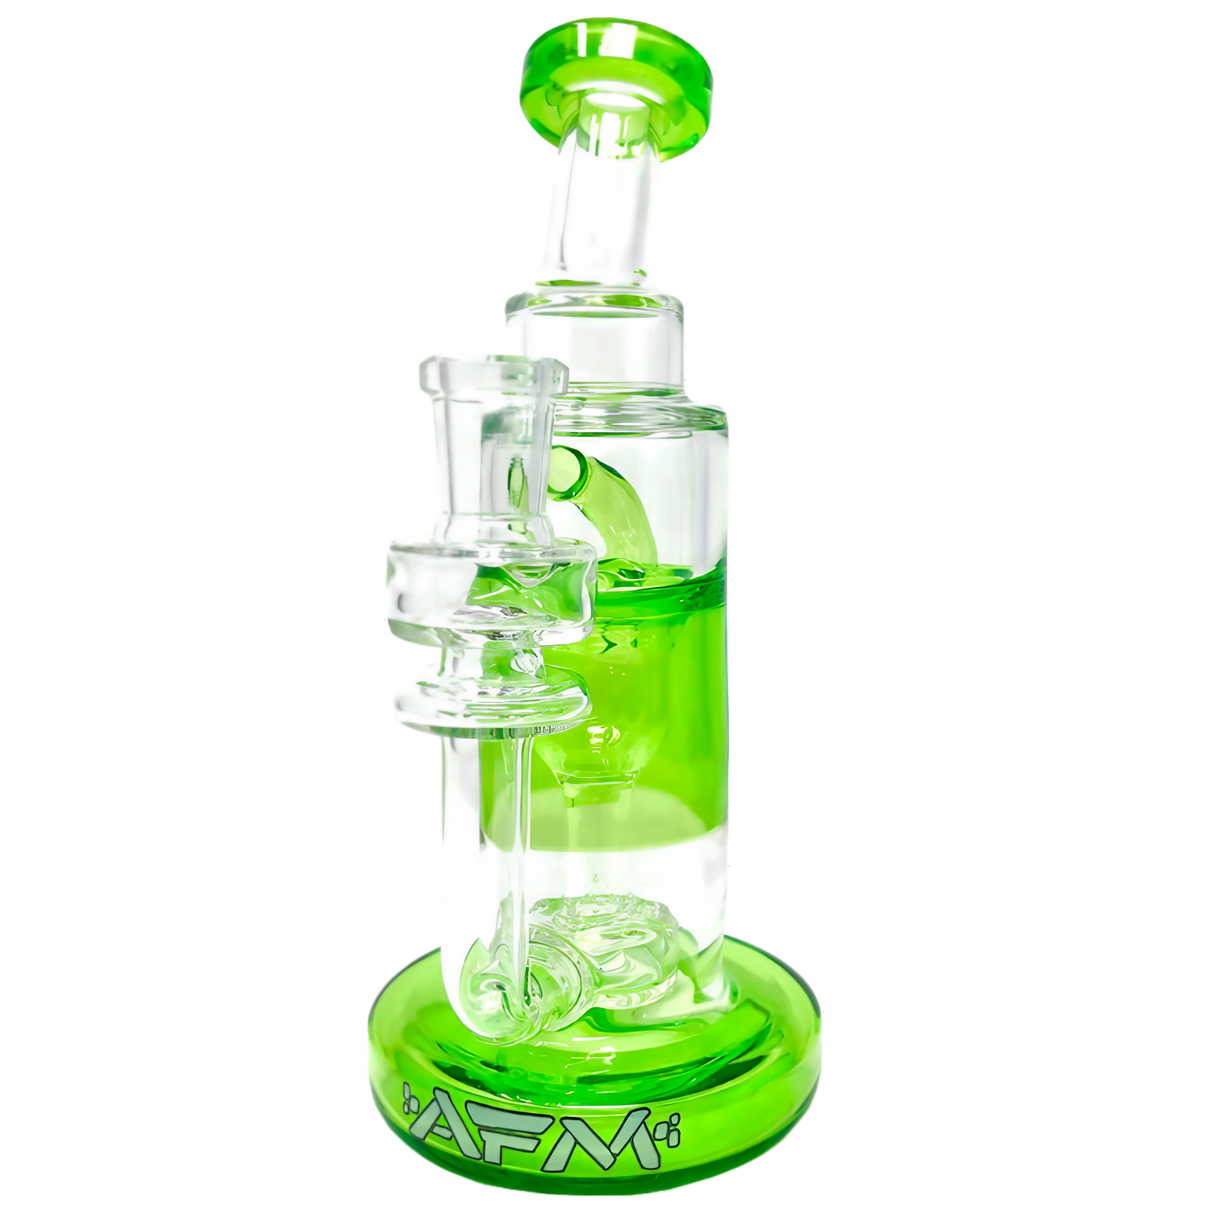 AFM Glass Power Incycler Dab Rig, 8.5" with Slit-Diffuser Percolator, Green Accents